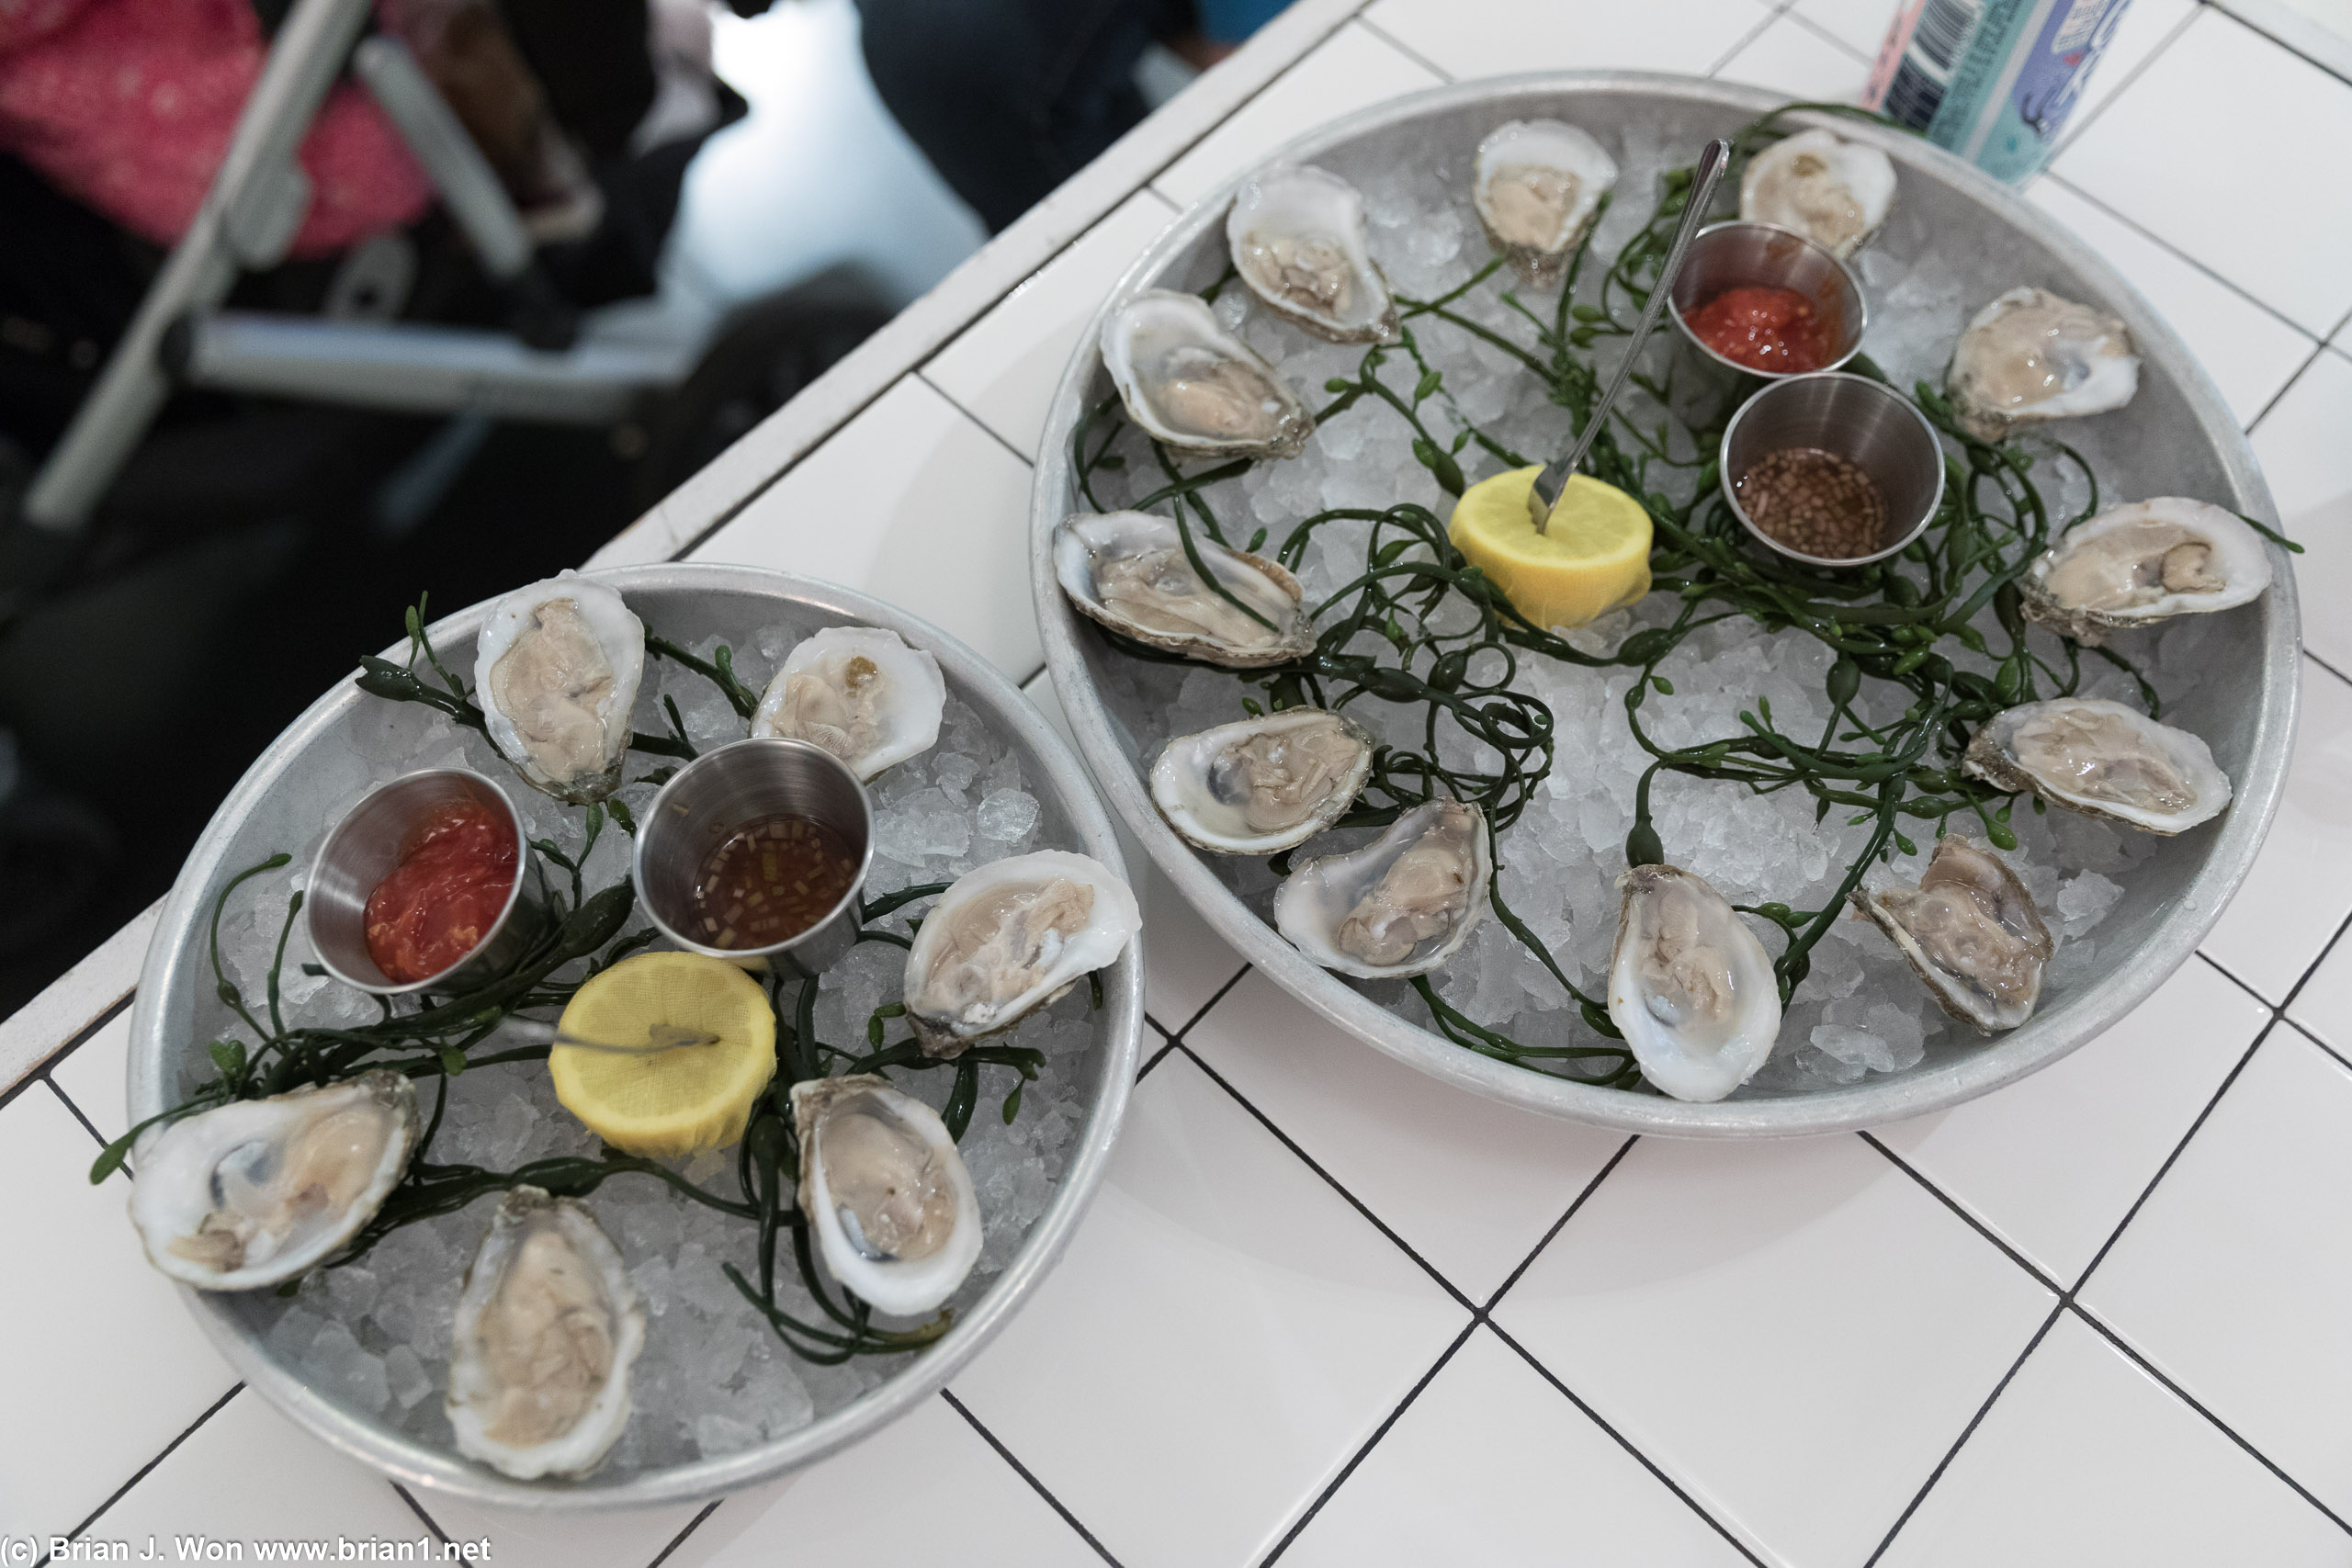 Oysters? Yes please!